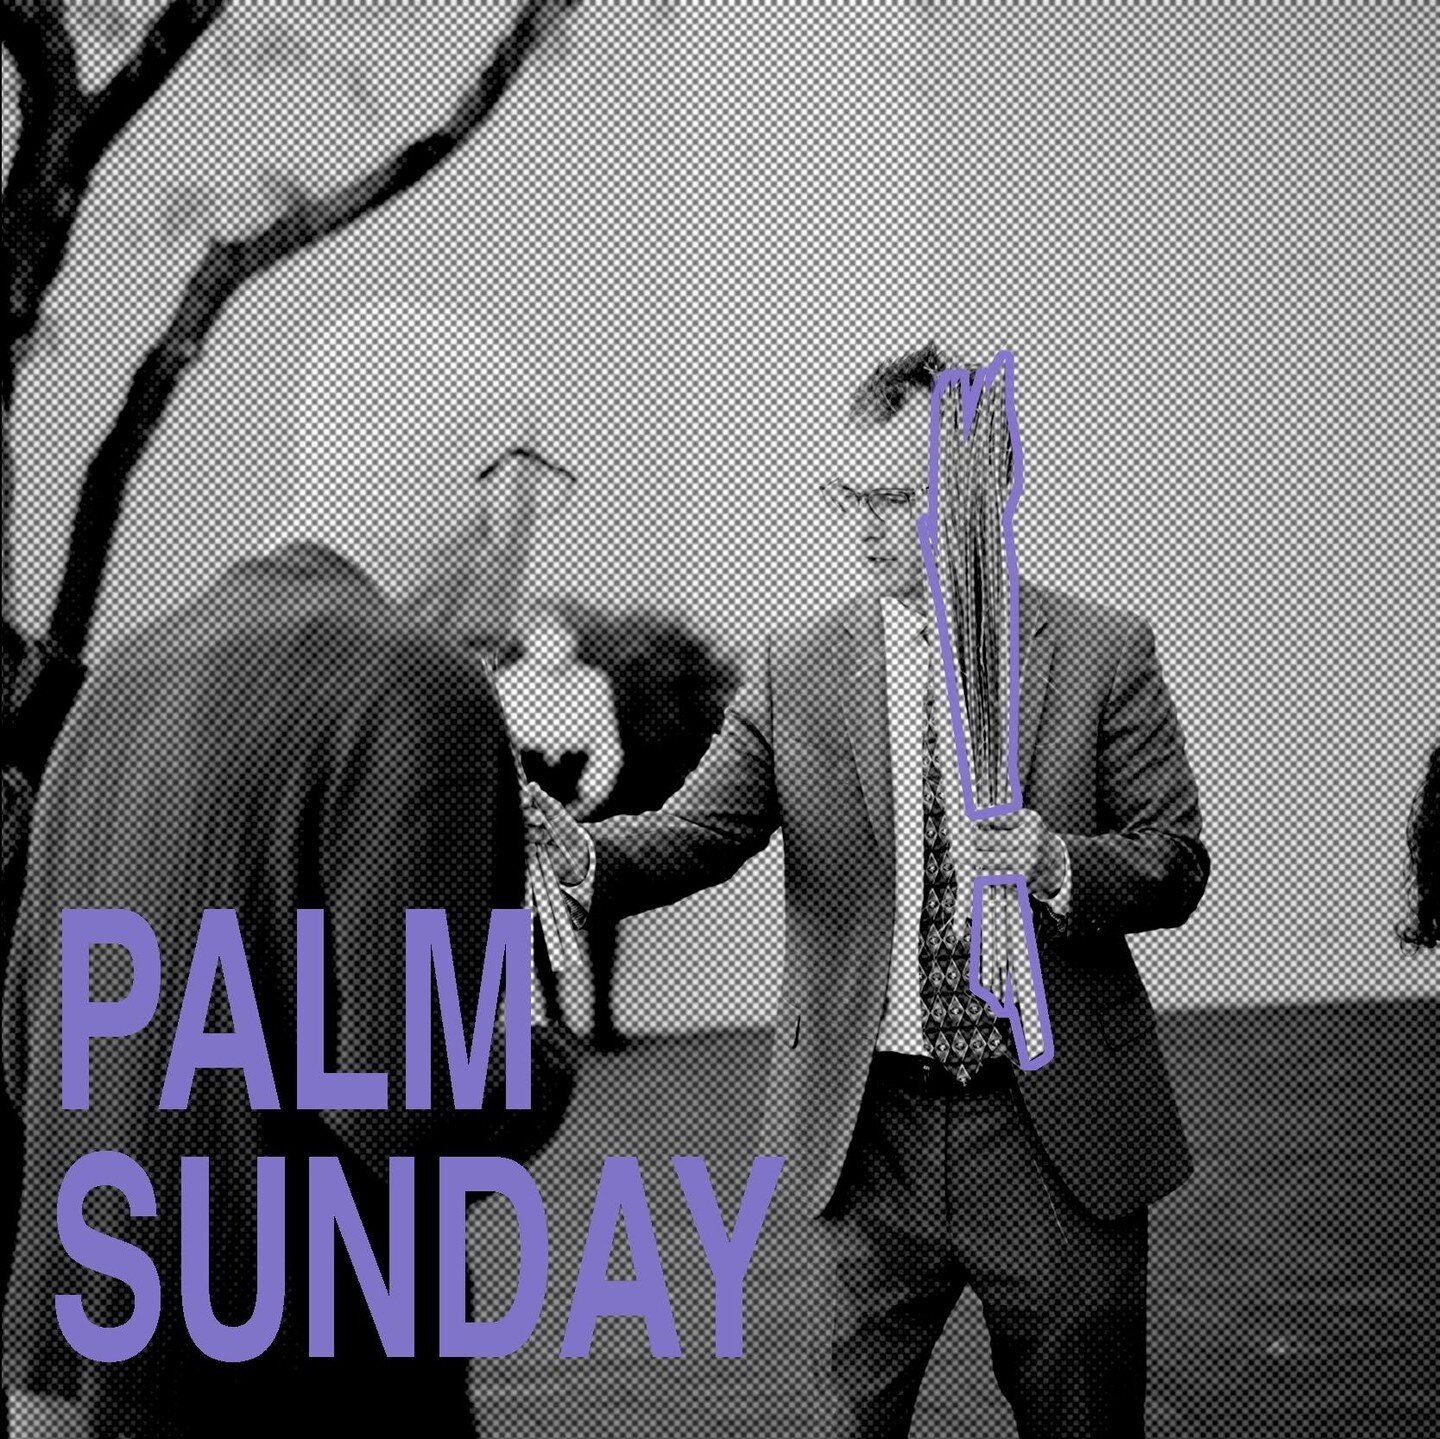 Palm Sunday marks the final week of Lent as we prepare for Holy Week. We are reminded of when Christ enters Jerusalem as palms are placed in his path, before his arrest and crucifixion. ⁠
⁠
Philippians 2:8-9⁠
-⁠
Christ became obedient to the point of